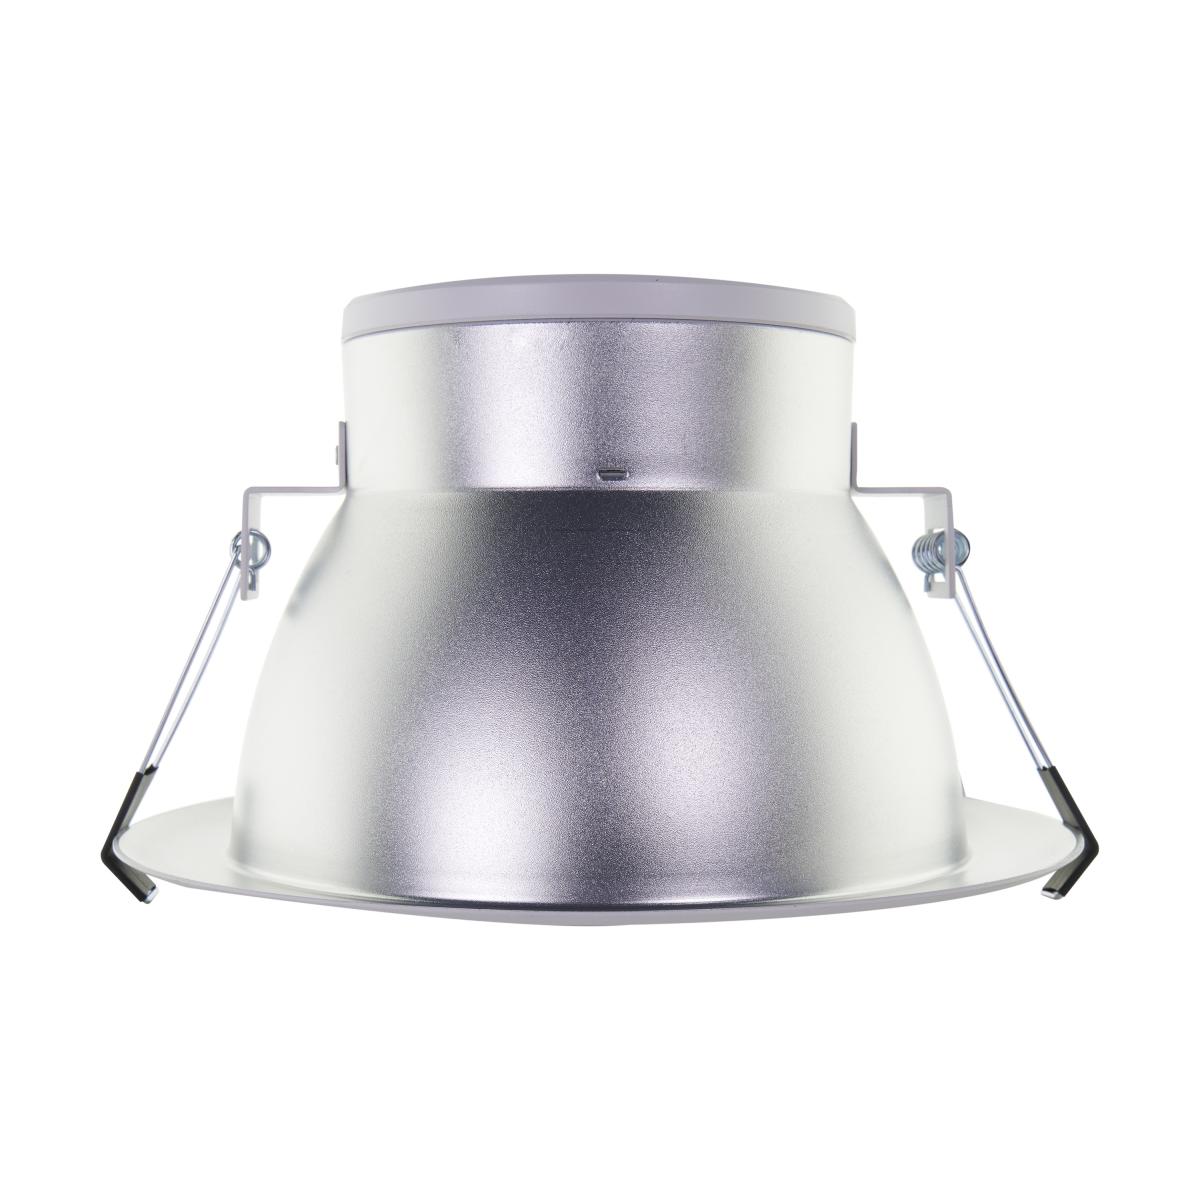 Commercial LED Recessed Downlight Retrofits - Installs into retrofit hole cut or frame-in kit.